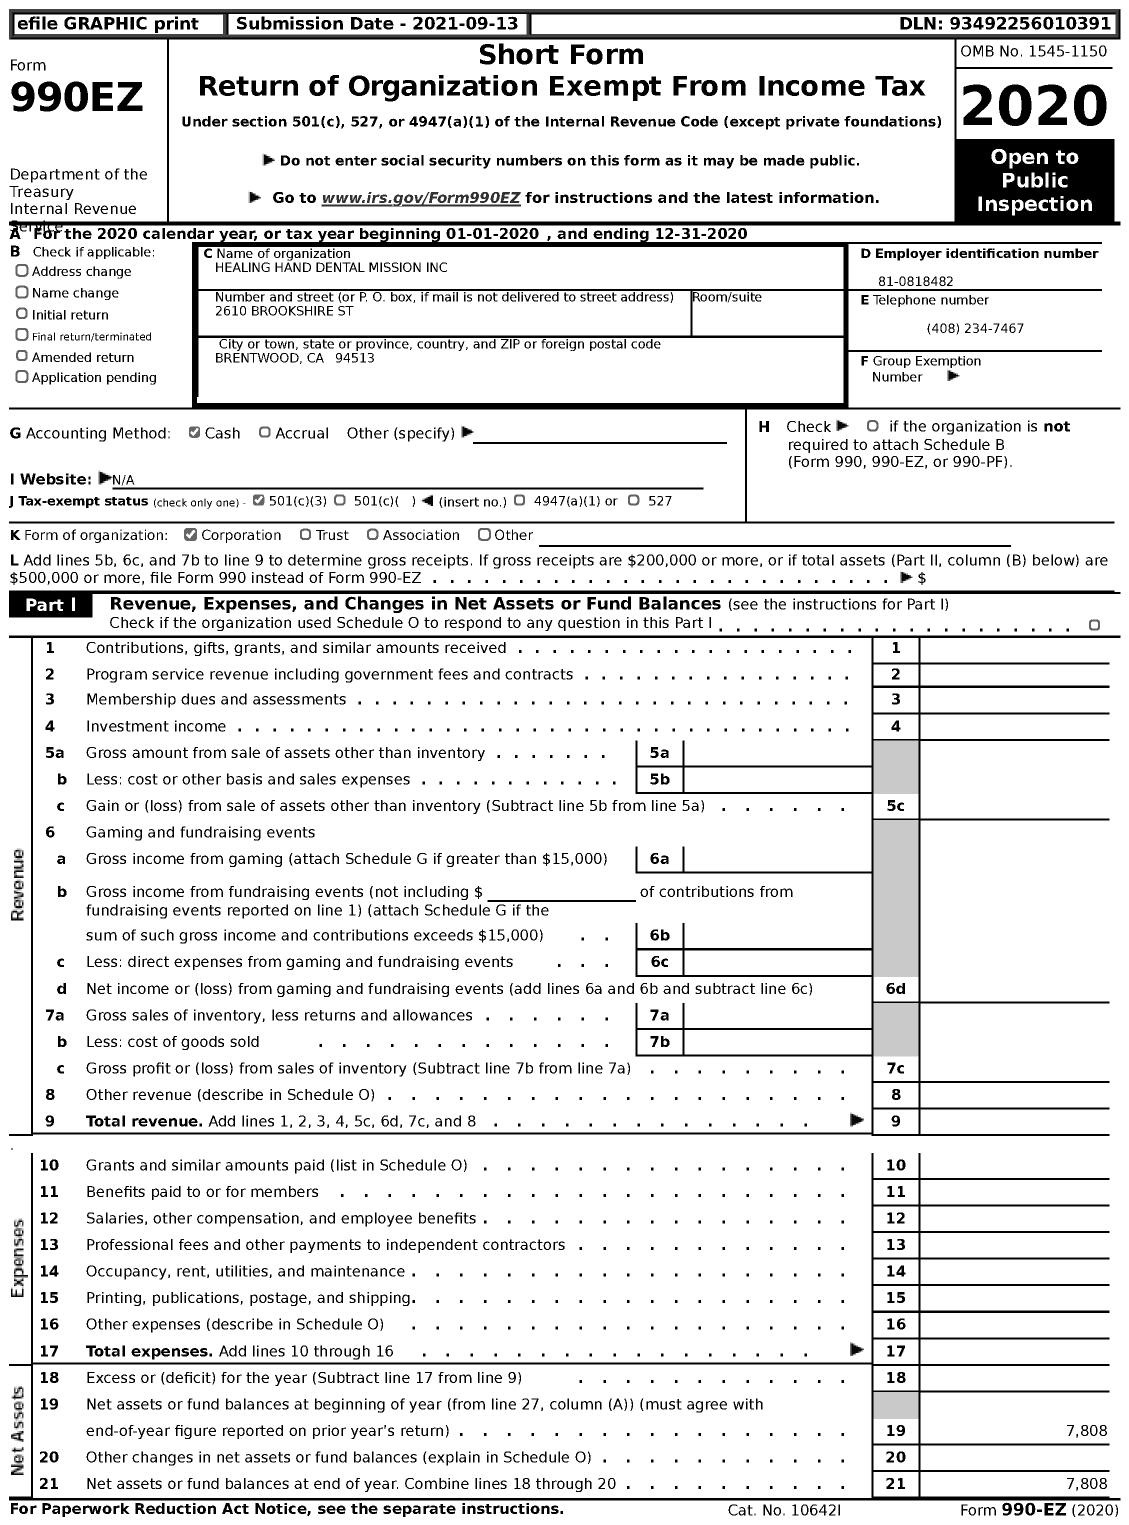 Image of first page of 2020 Form 990EZ for Healing Hand Dental Mission